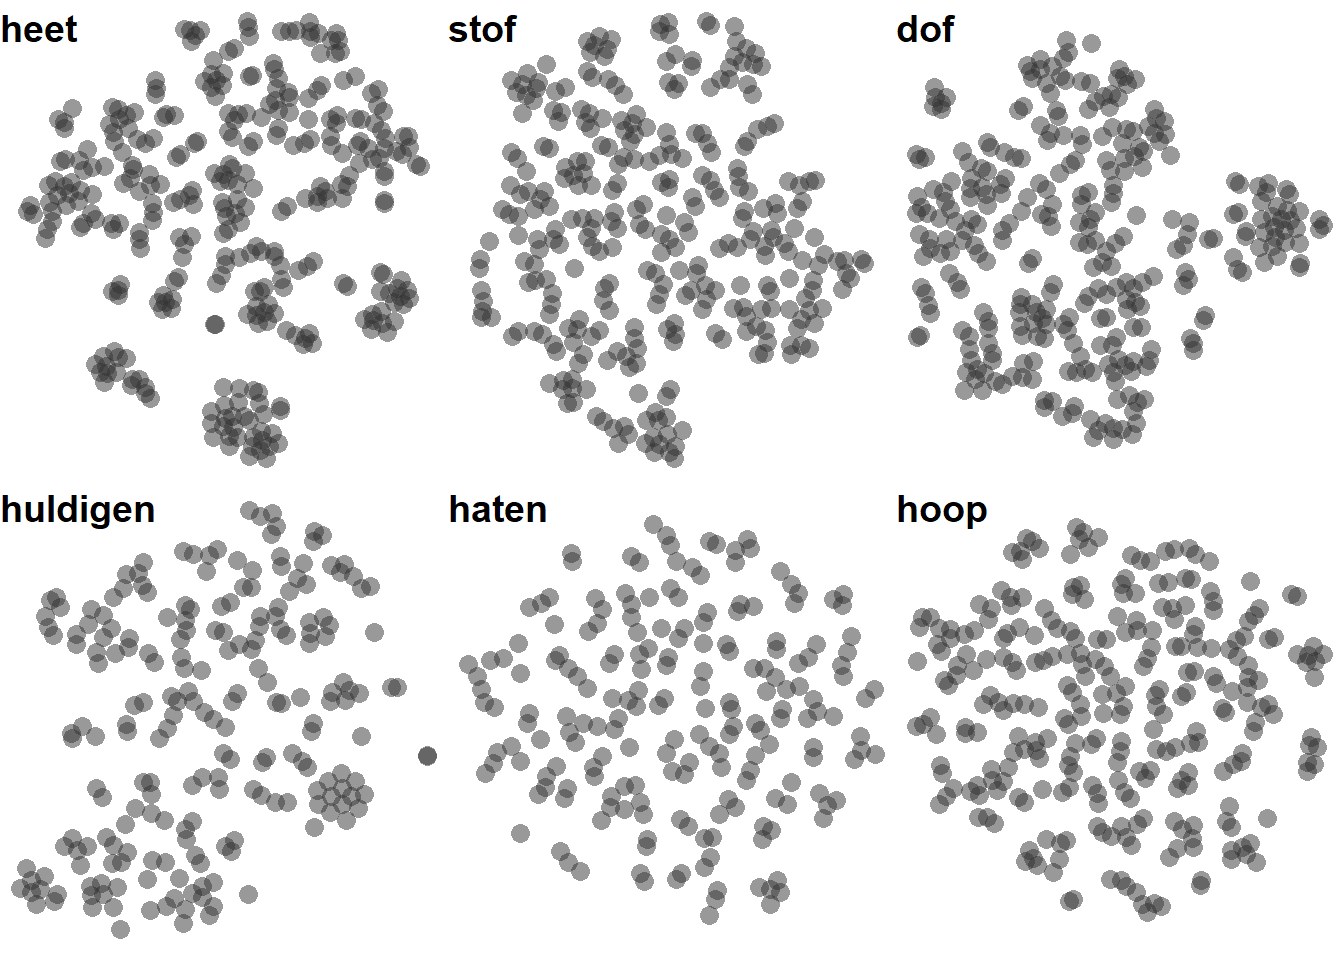 Uncoloured t-sne representations of the same parameter settings (bound5lex-ppmiselection-focall) across six different lemmas.